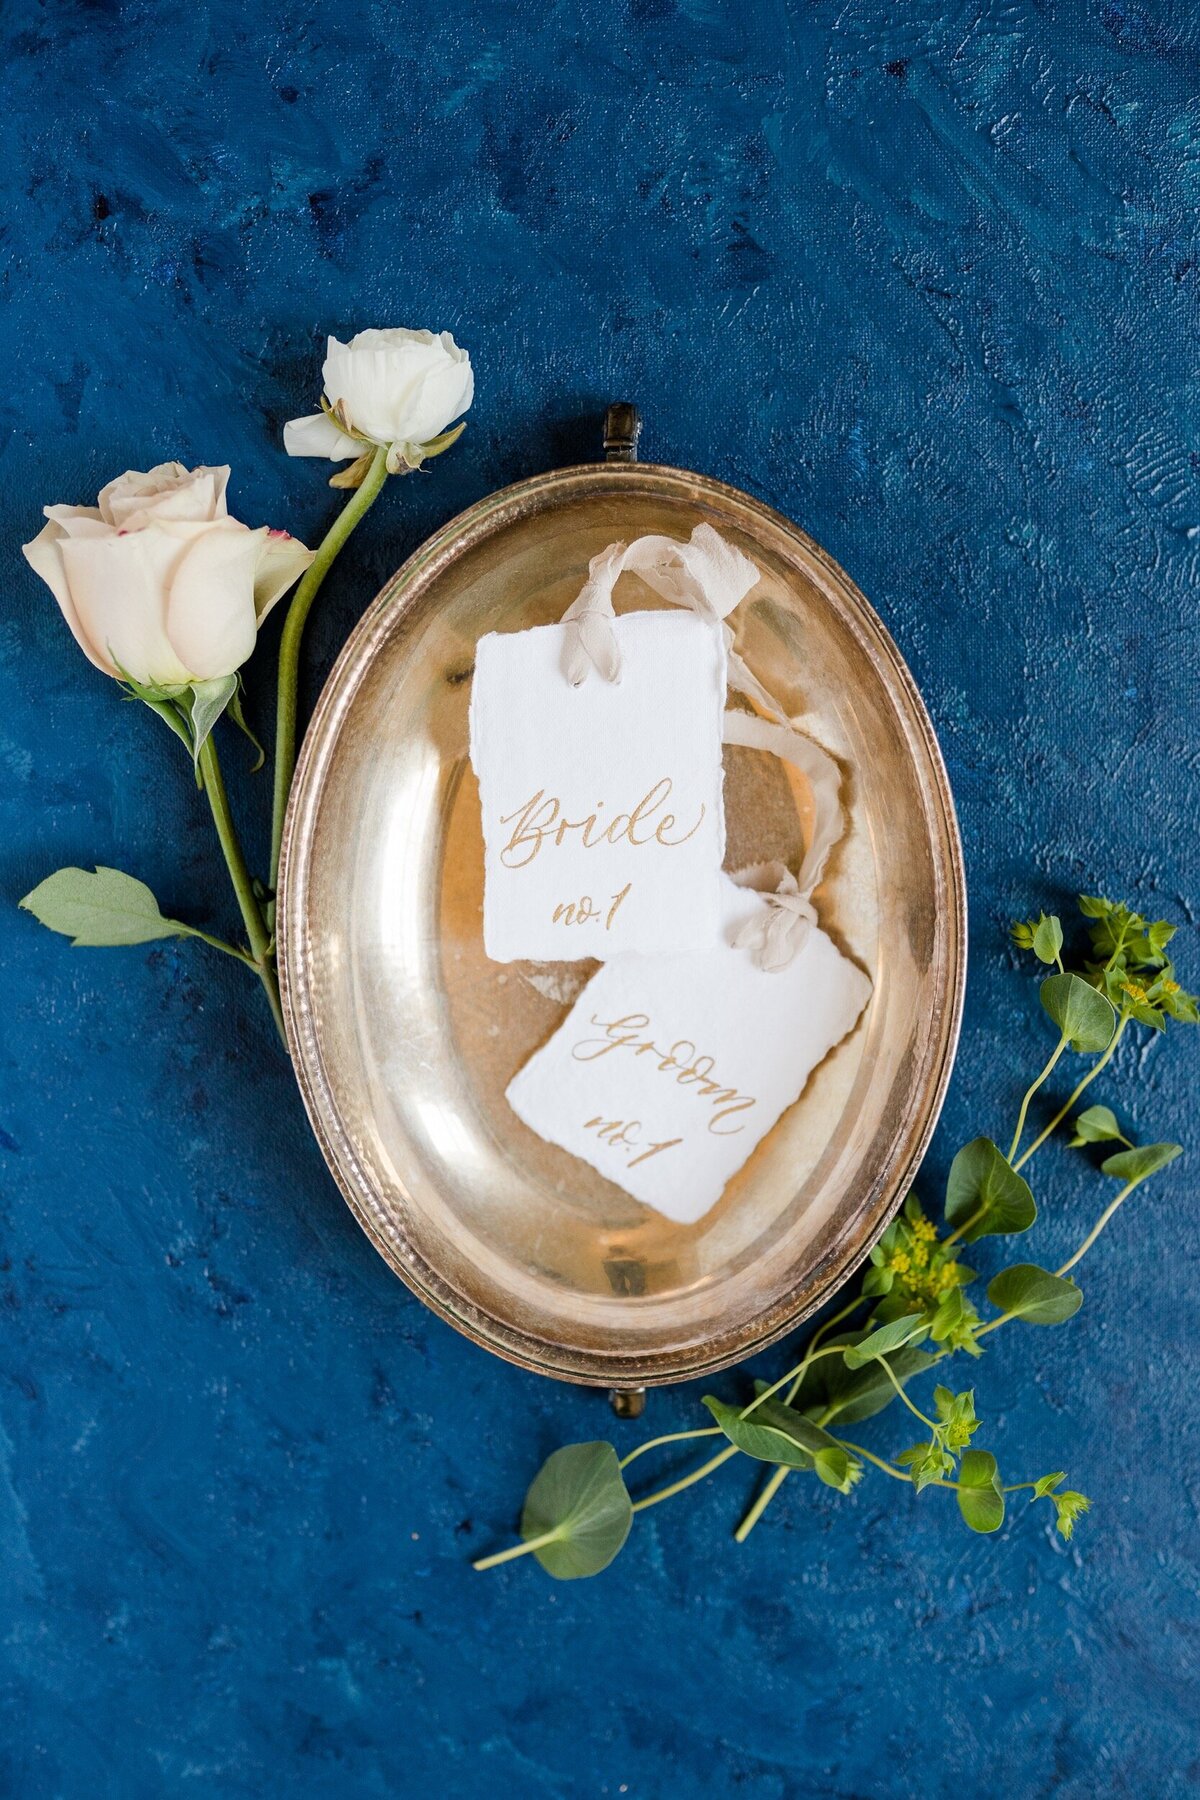 A photo of handmade escort cards for the bride and groom styled in a vintage silver tray on a handpainted blue background at a Charlotte wedding.